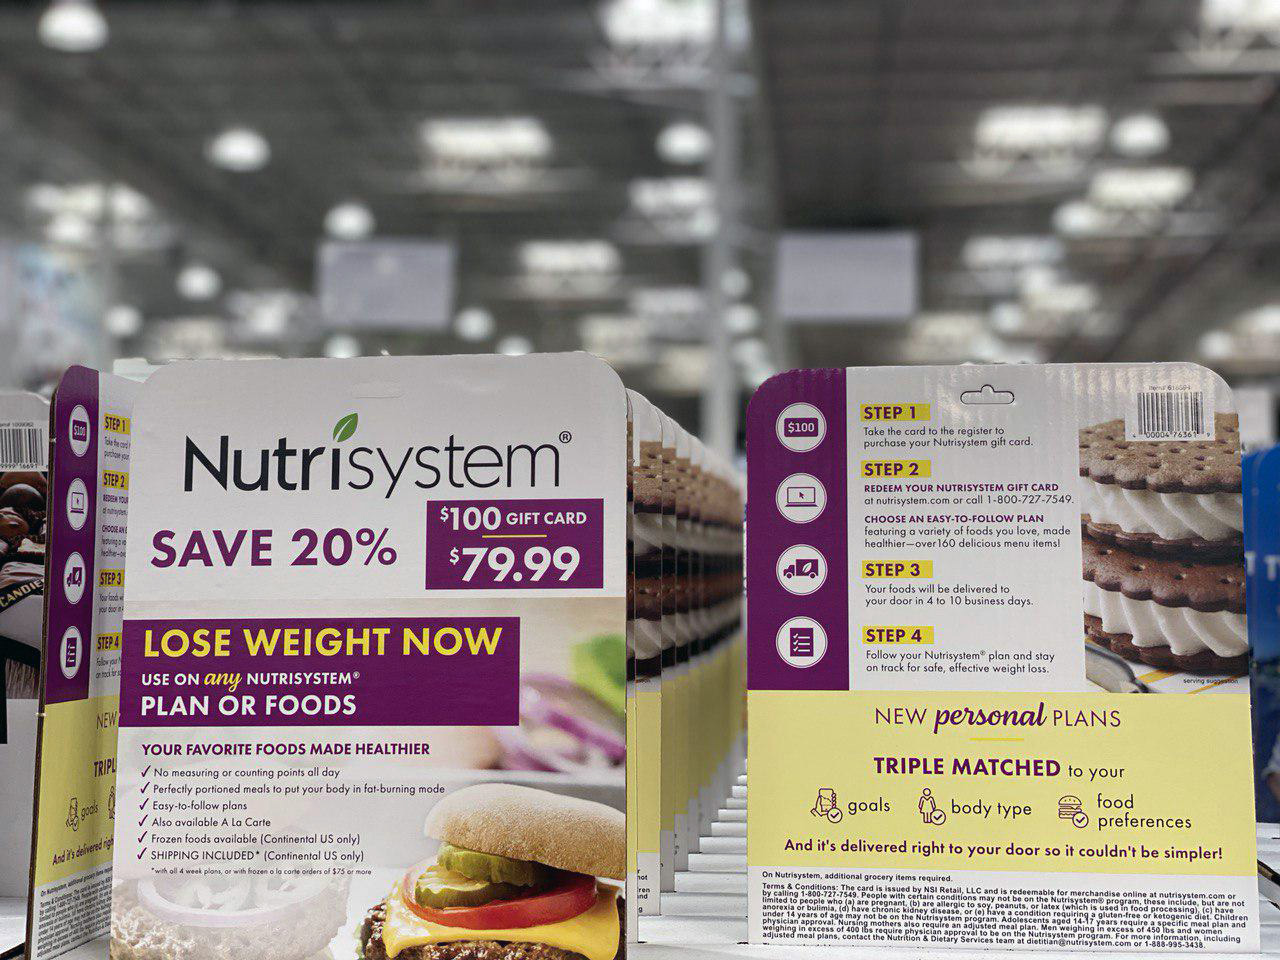 NutriSystem 20% off New Personal Plans